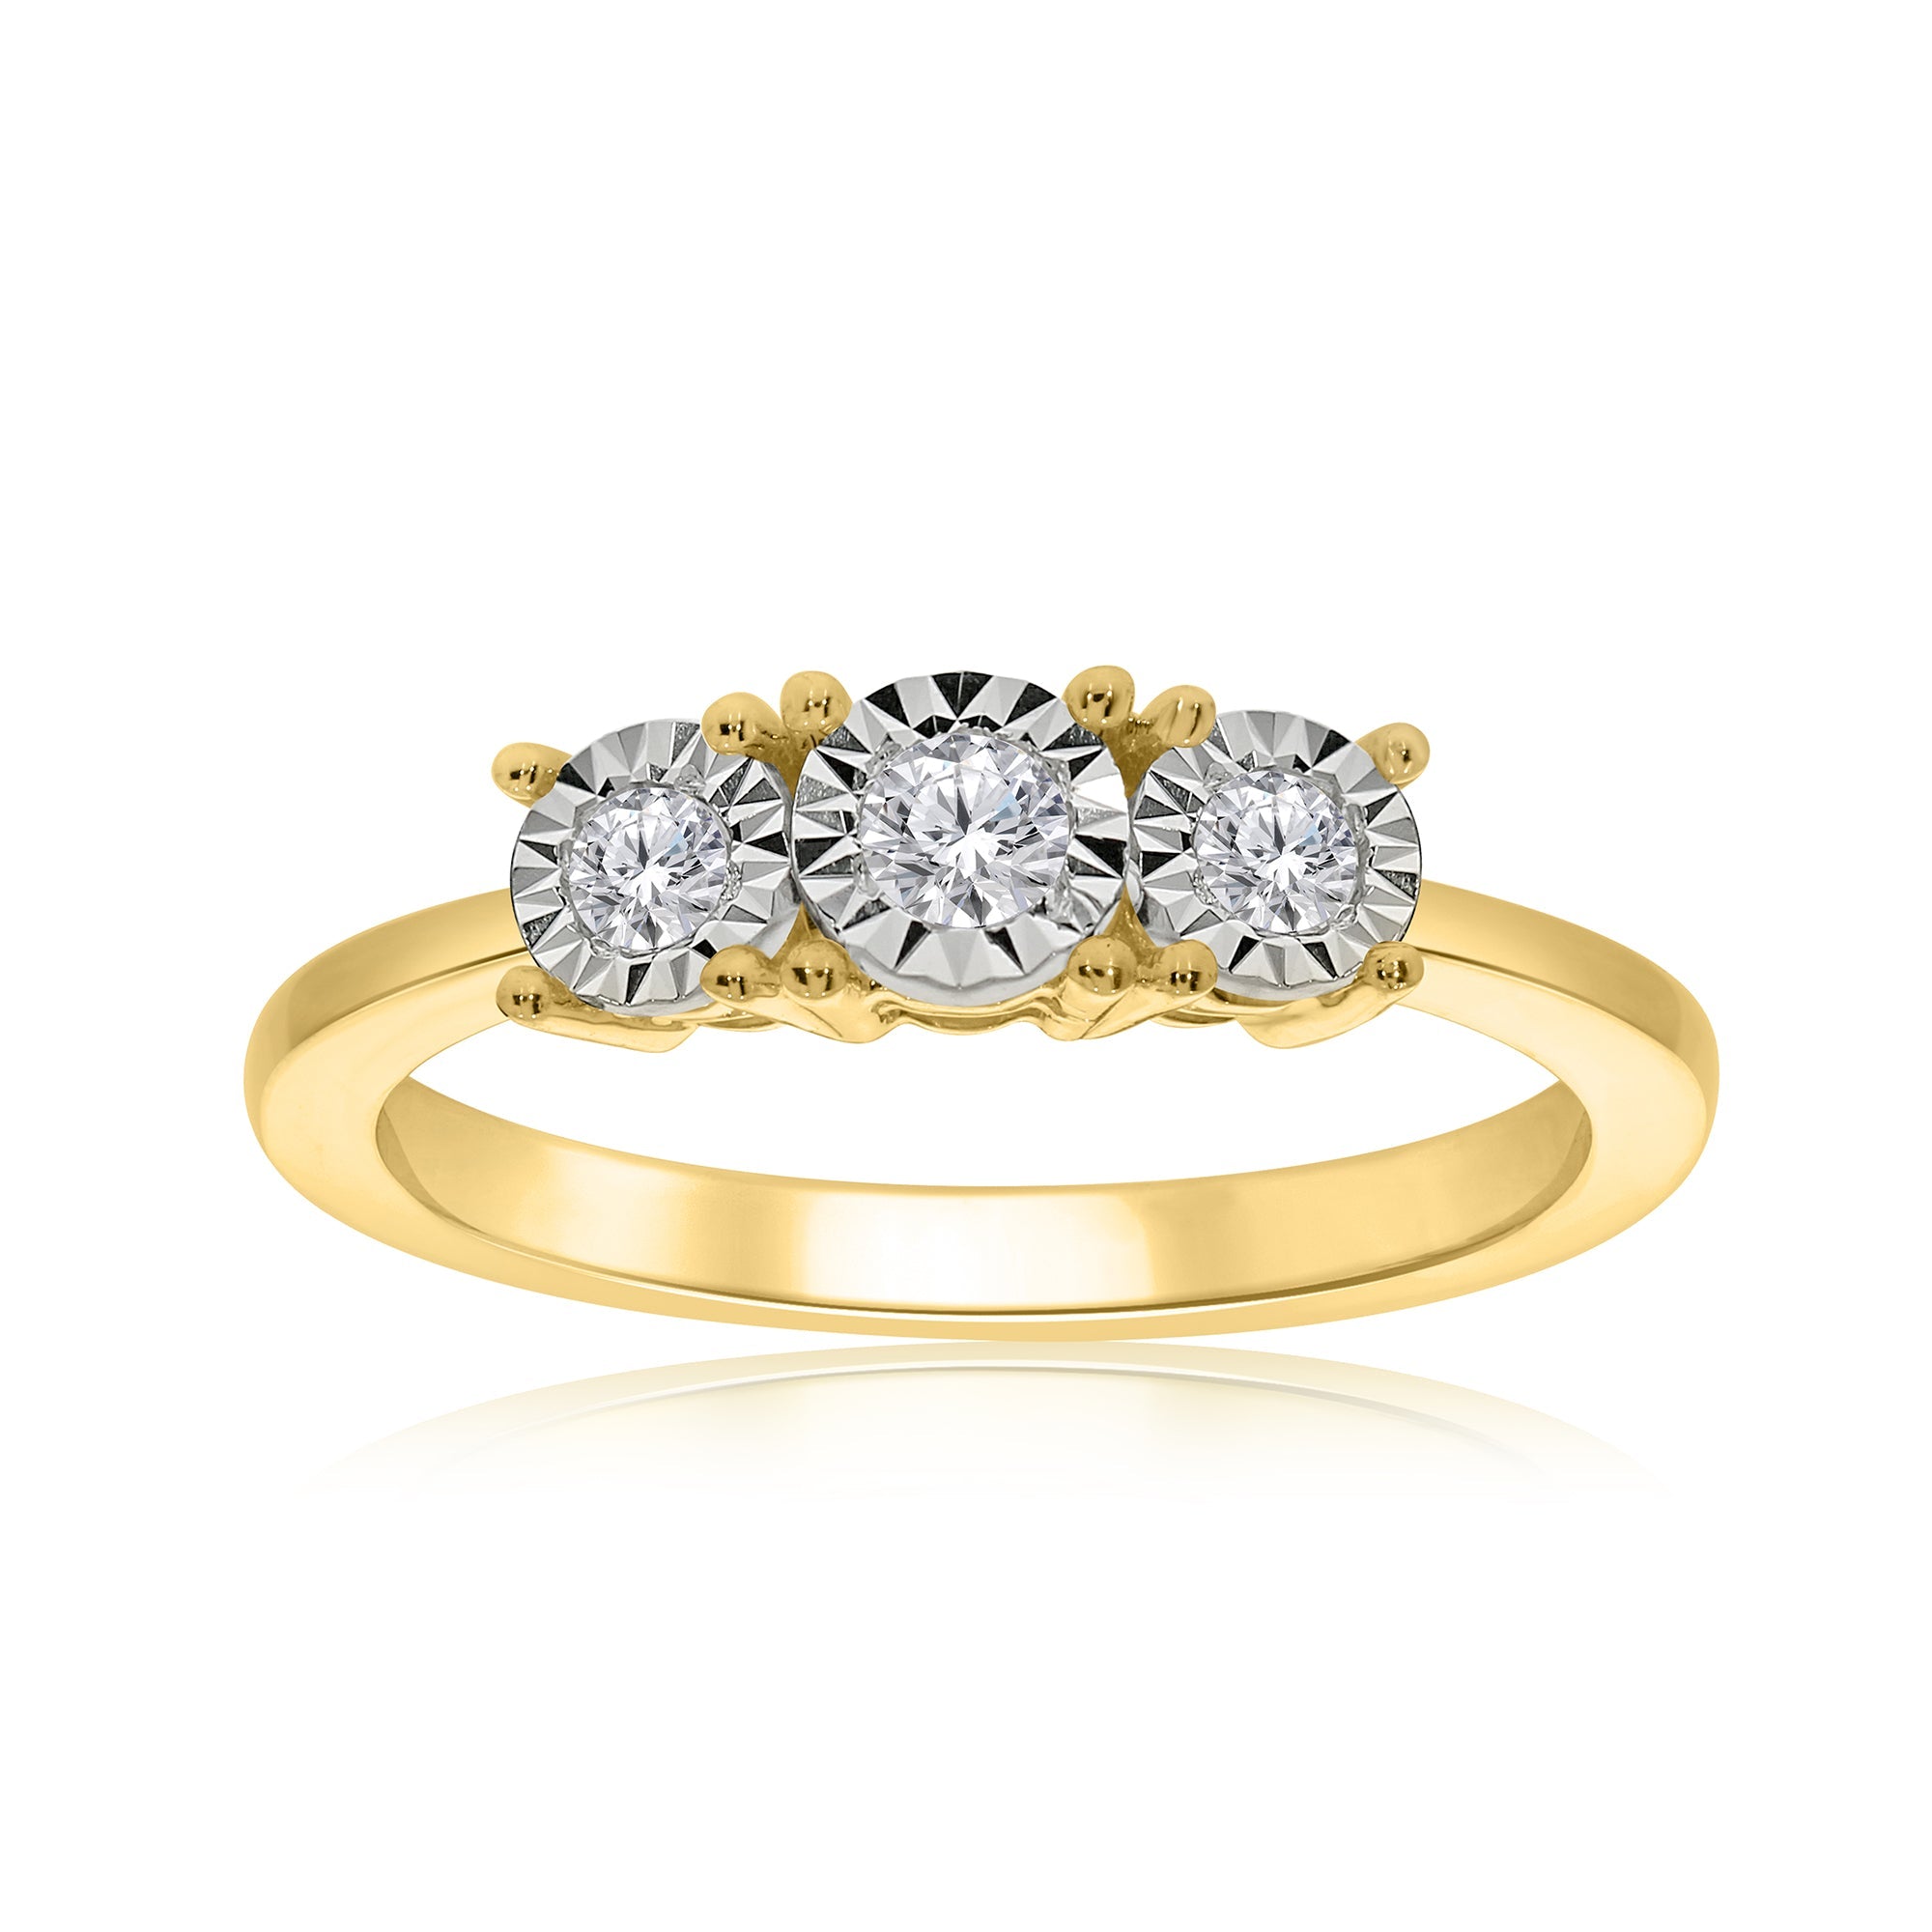 9ct gold 3 stone miracle plate diamond ring 0.15ct